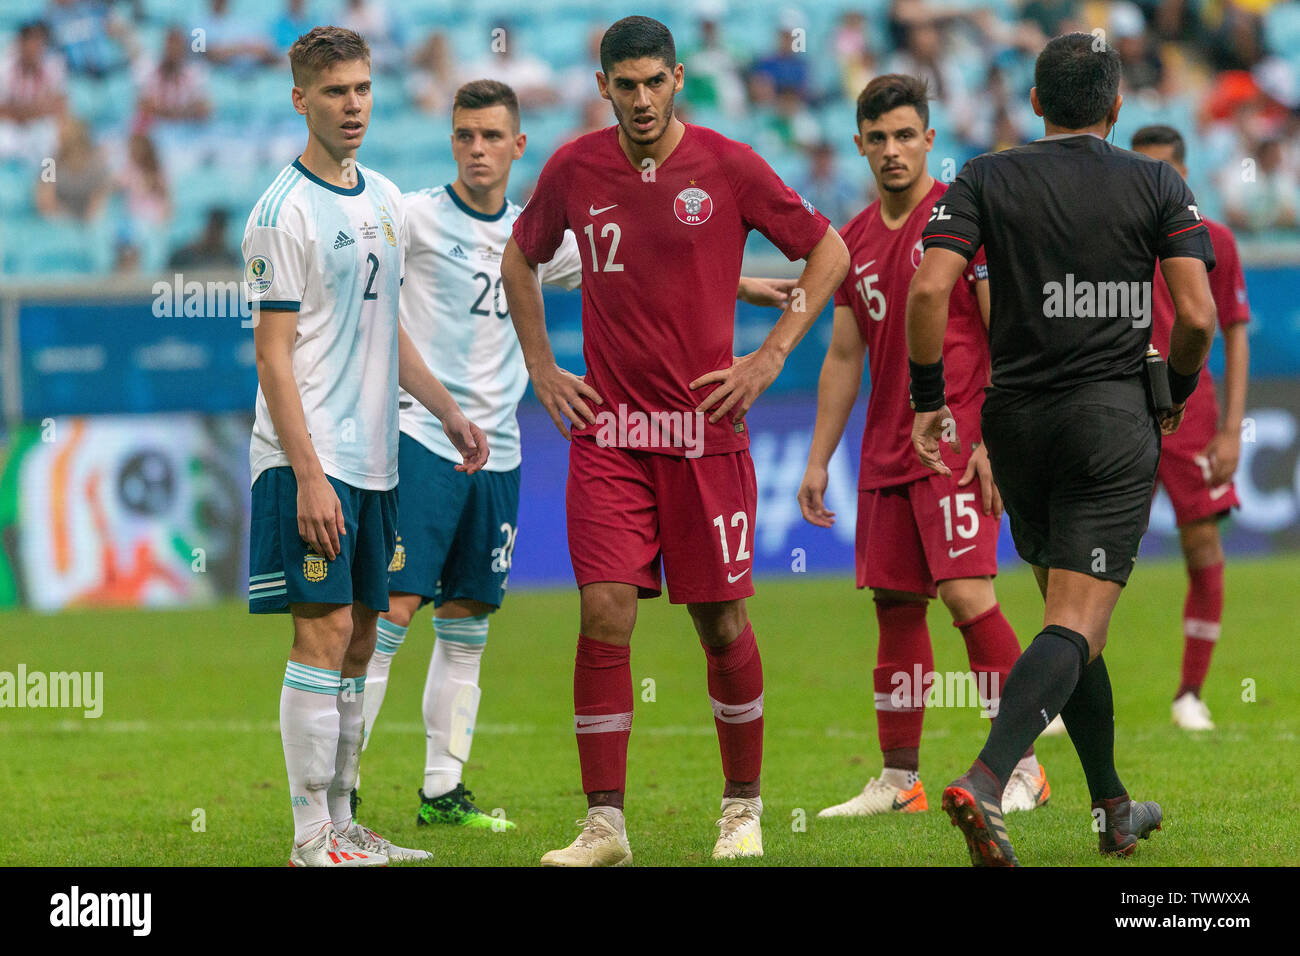 Porto Alegre, Brazil. 23rd June, 2019. Karim Boudiaf is bidding during a match between Qatar and Argentina, valid for the 2019 Copa America group stage, held this Sunday (23) at the Grêmio Arena in Porto Alegre, RS. Credit: Raul Pereira/FotoArena/Alamy Live News Stock Photo